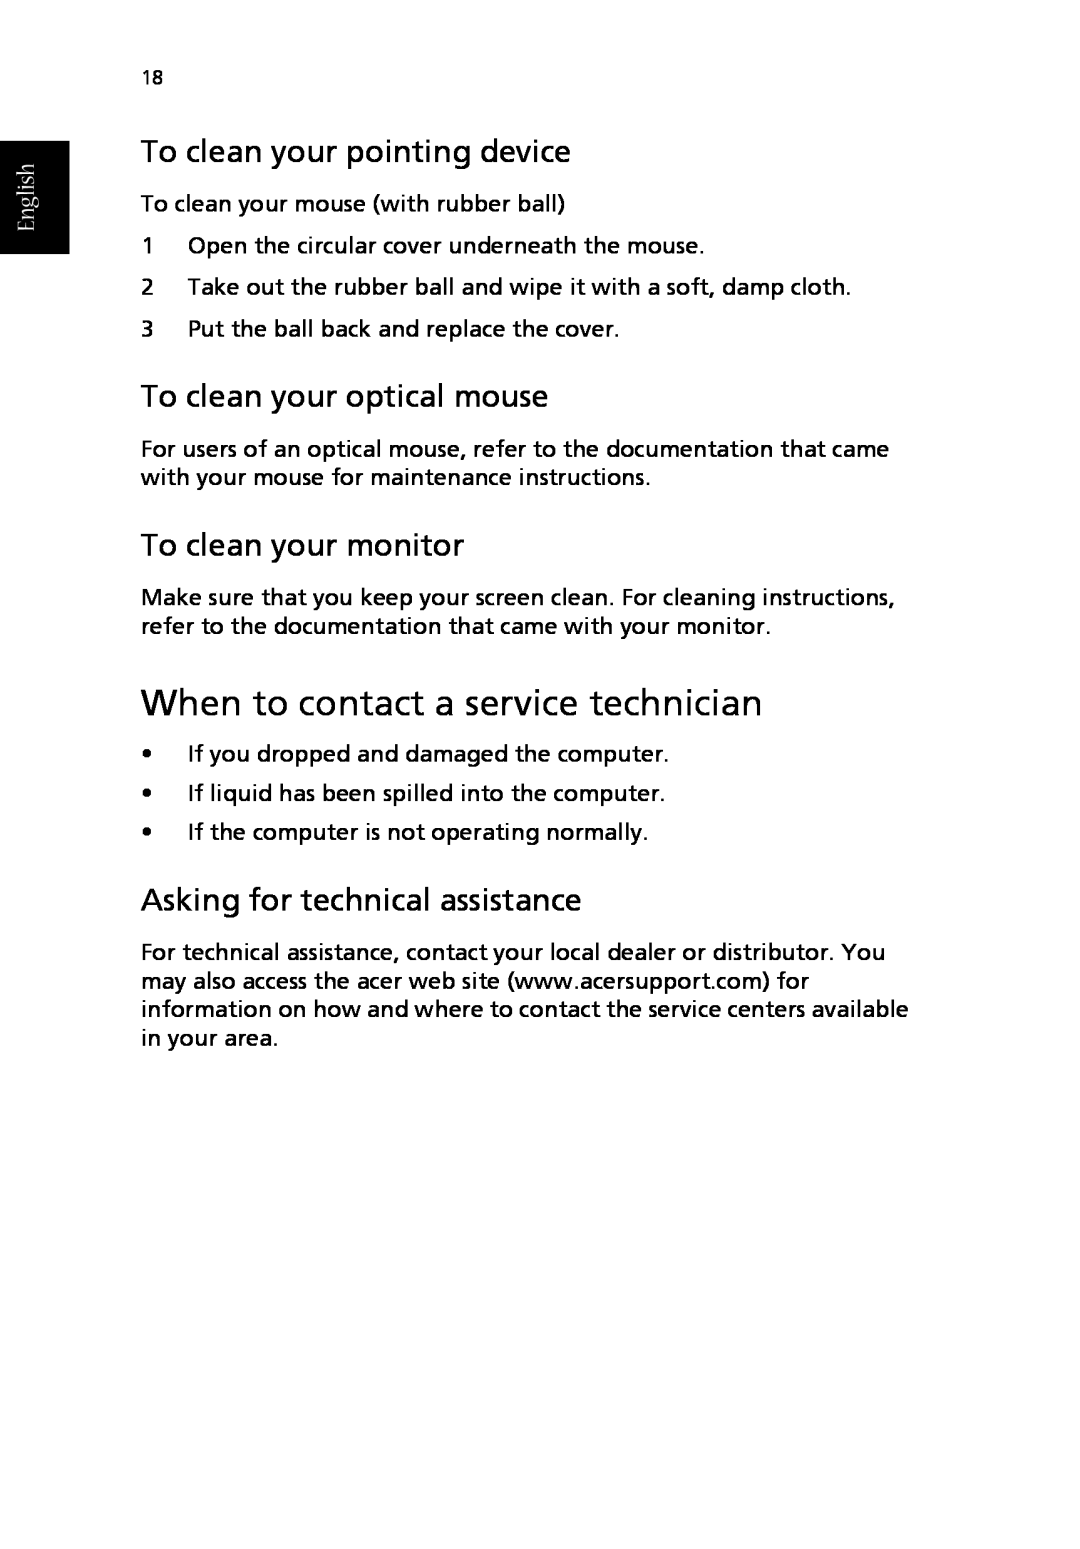 Acer T650A manual When to contact a service technician, To clean your pointing device, To clean your optical mouse, English 